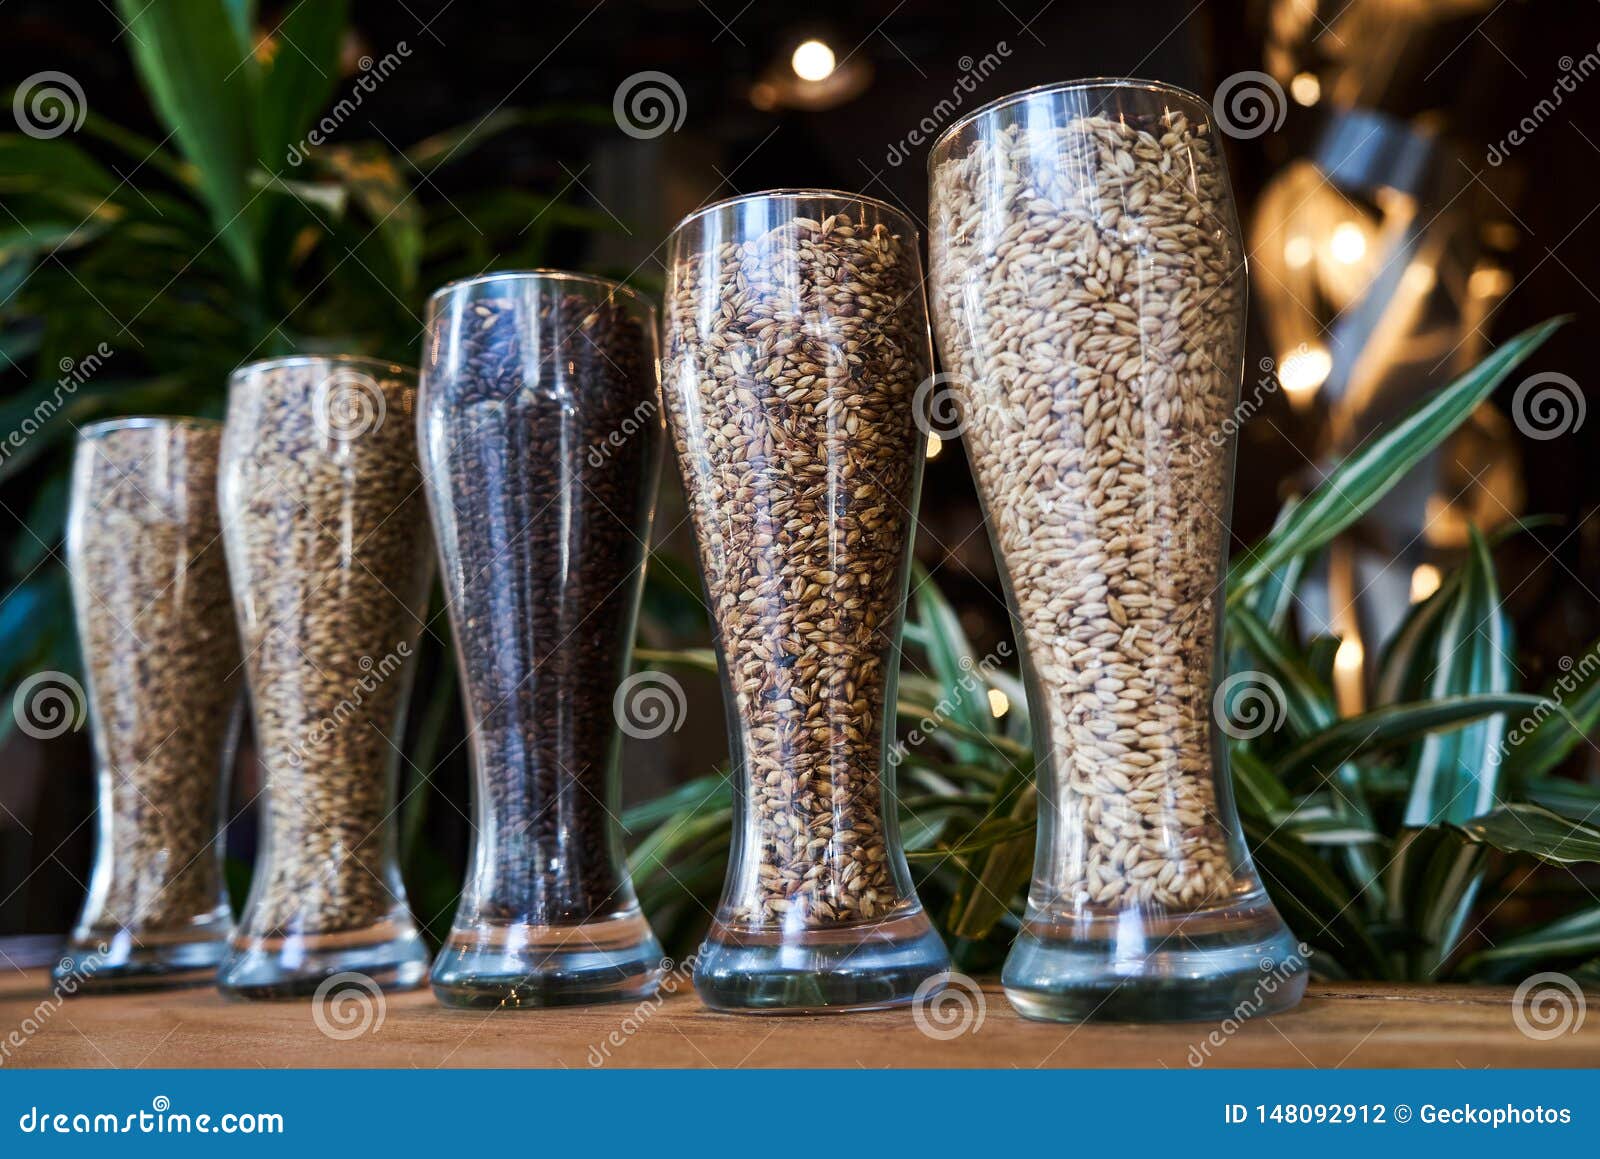 Beer Glasses Filled With Different Malts And Hops, Close ...